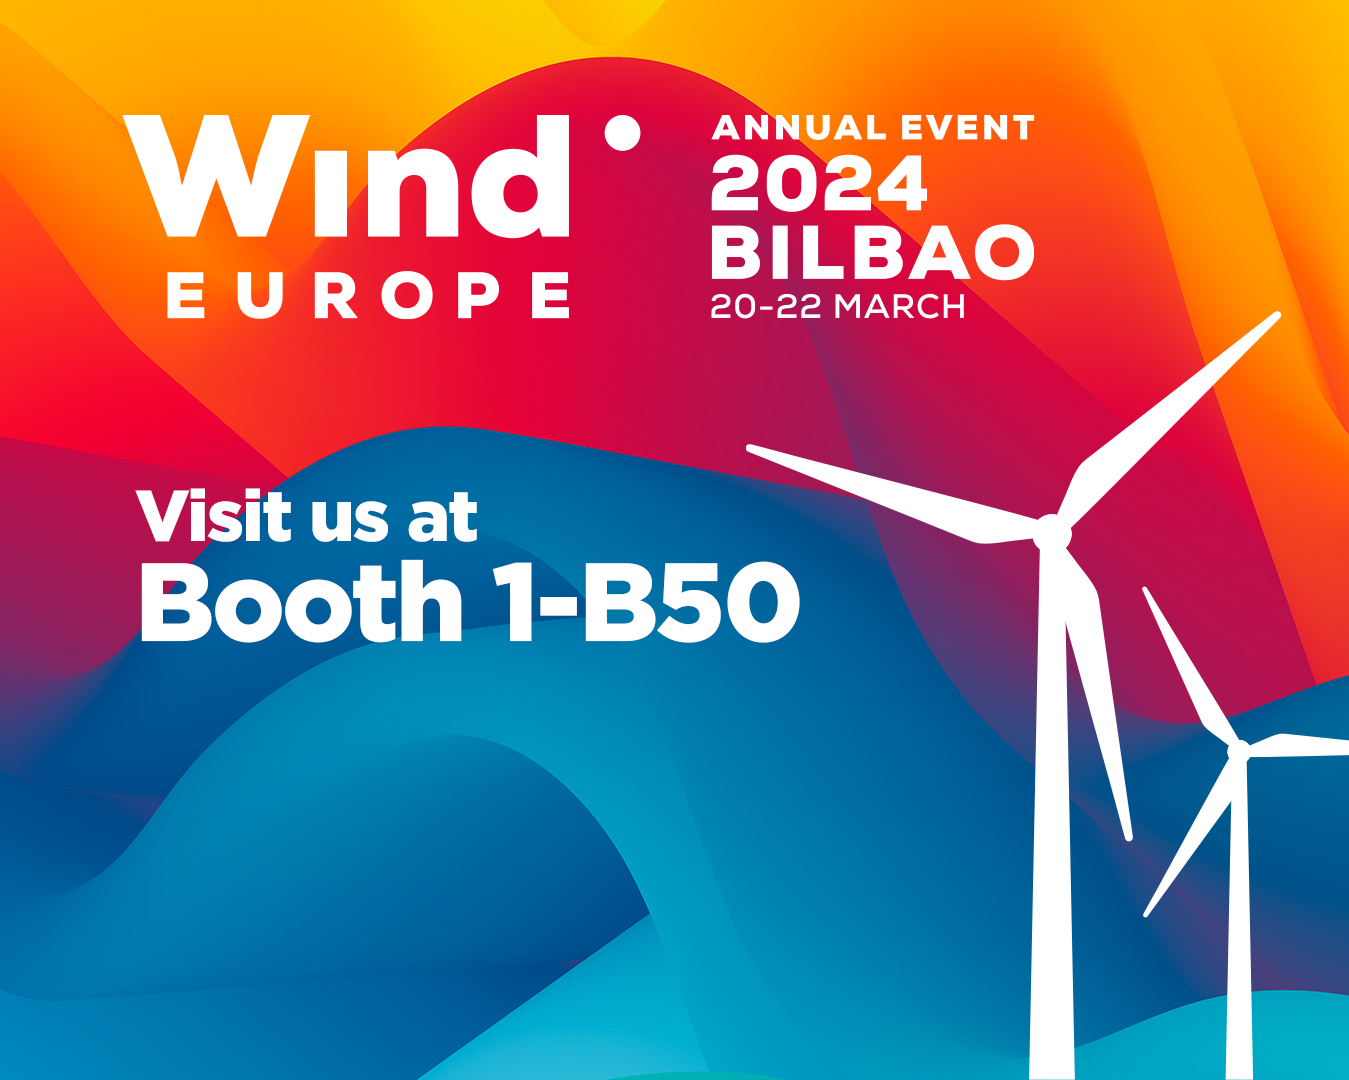 XUBI GROUP WILL ATTEND WIND EUROPE 2024 IN BILBAO FROM MARCH 20th TILL 22nd